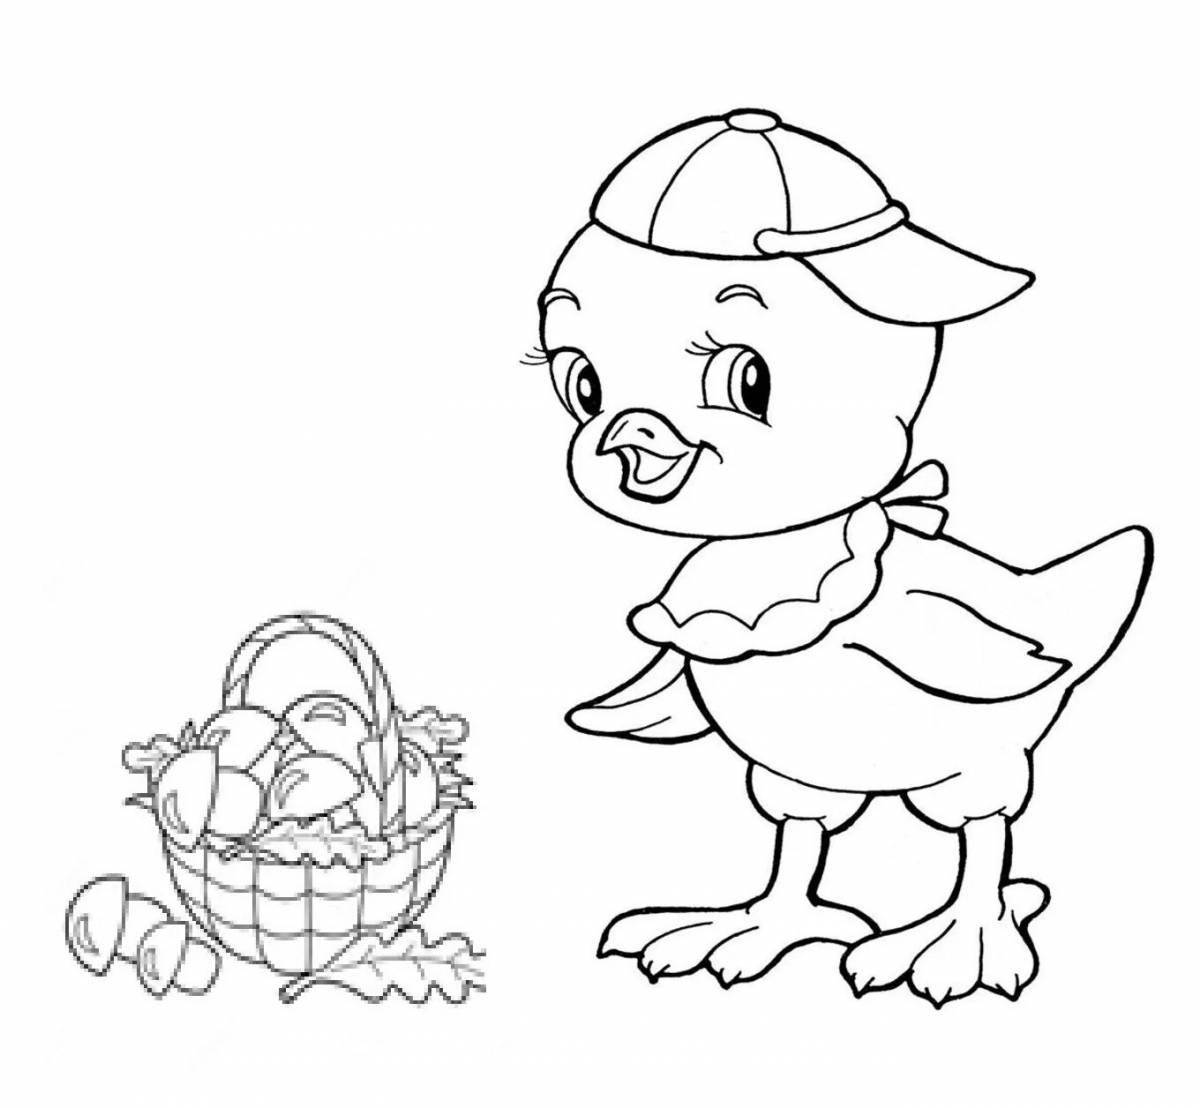 Adorable chicken coloring book for kids